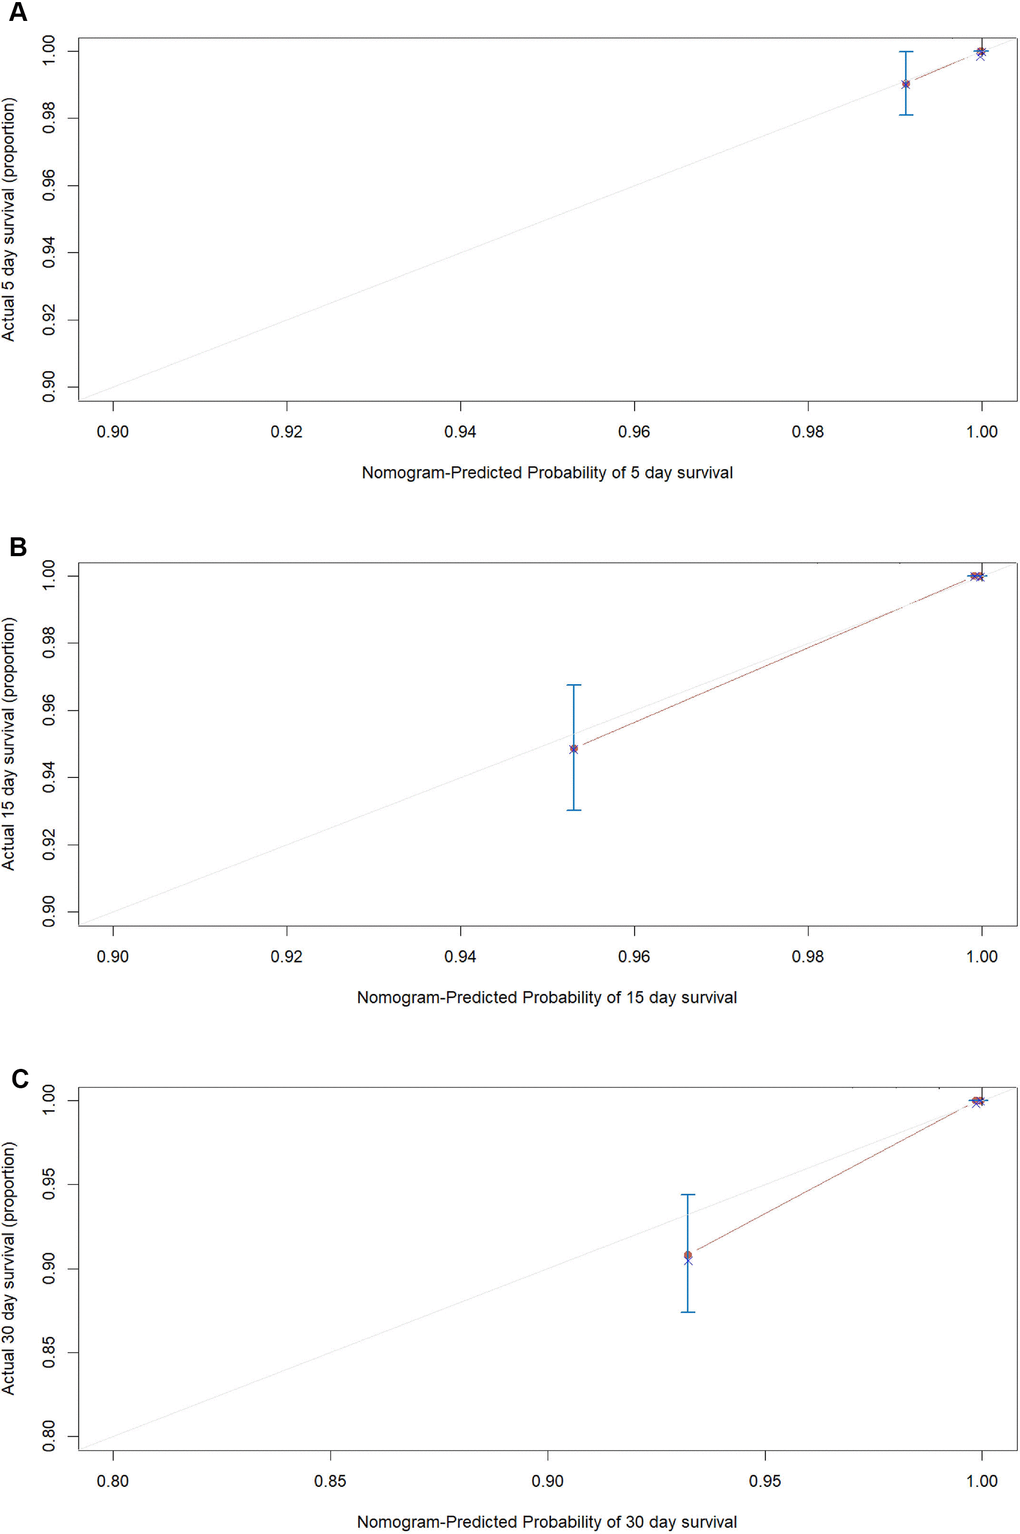 The calibration plots for the probability of in-hospital mortality of COVID-19 in the development cohort. Calibration plots of the nomogram predict (A) 5-day, (B) 15-day and (C) 30-day in-hospital mortality in COVID-19 patients in the development cohort. Nomogram-predicted probability of in-hospital mortality is plotted on the x-axis; actual in-hospital mortality is plotted on the y-axis.